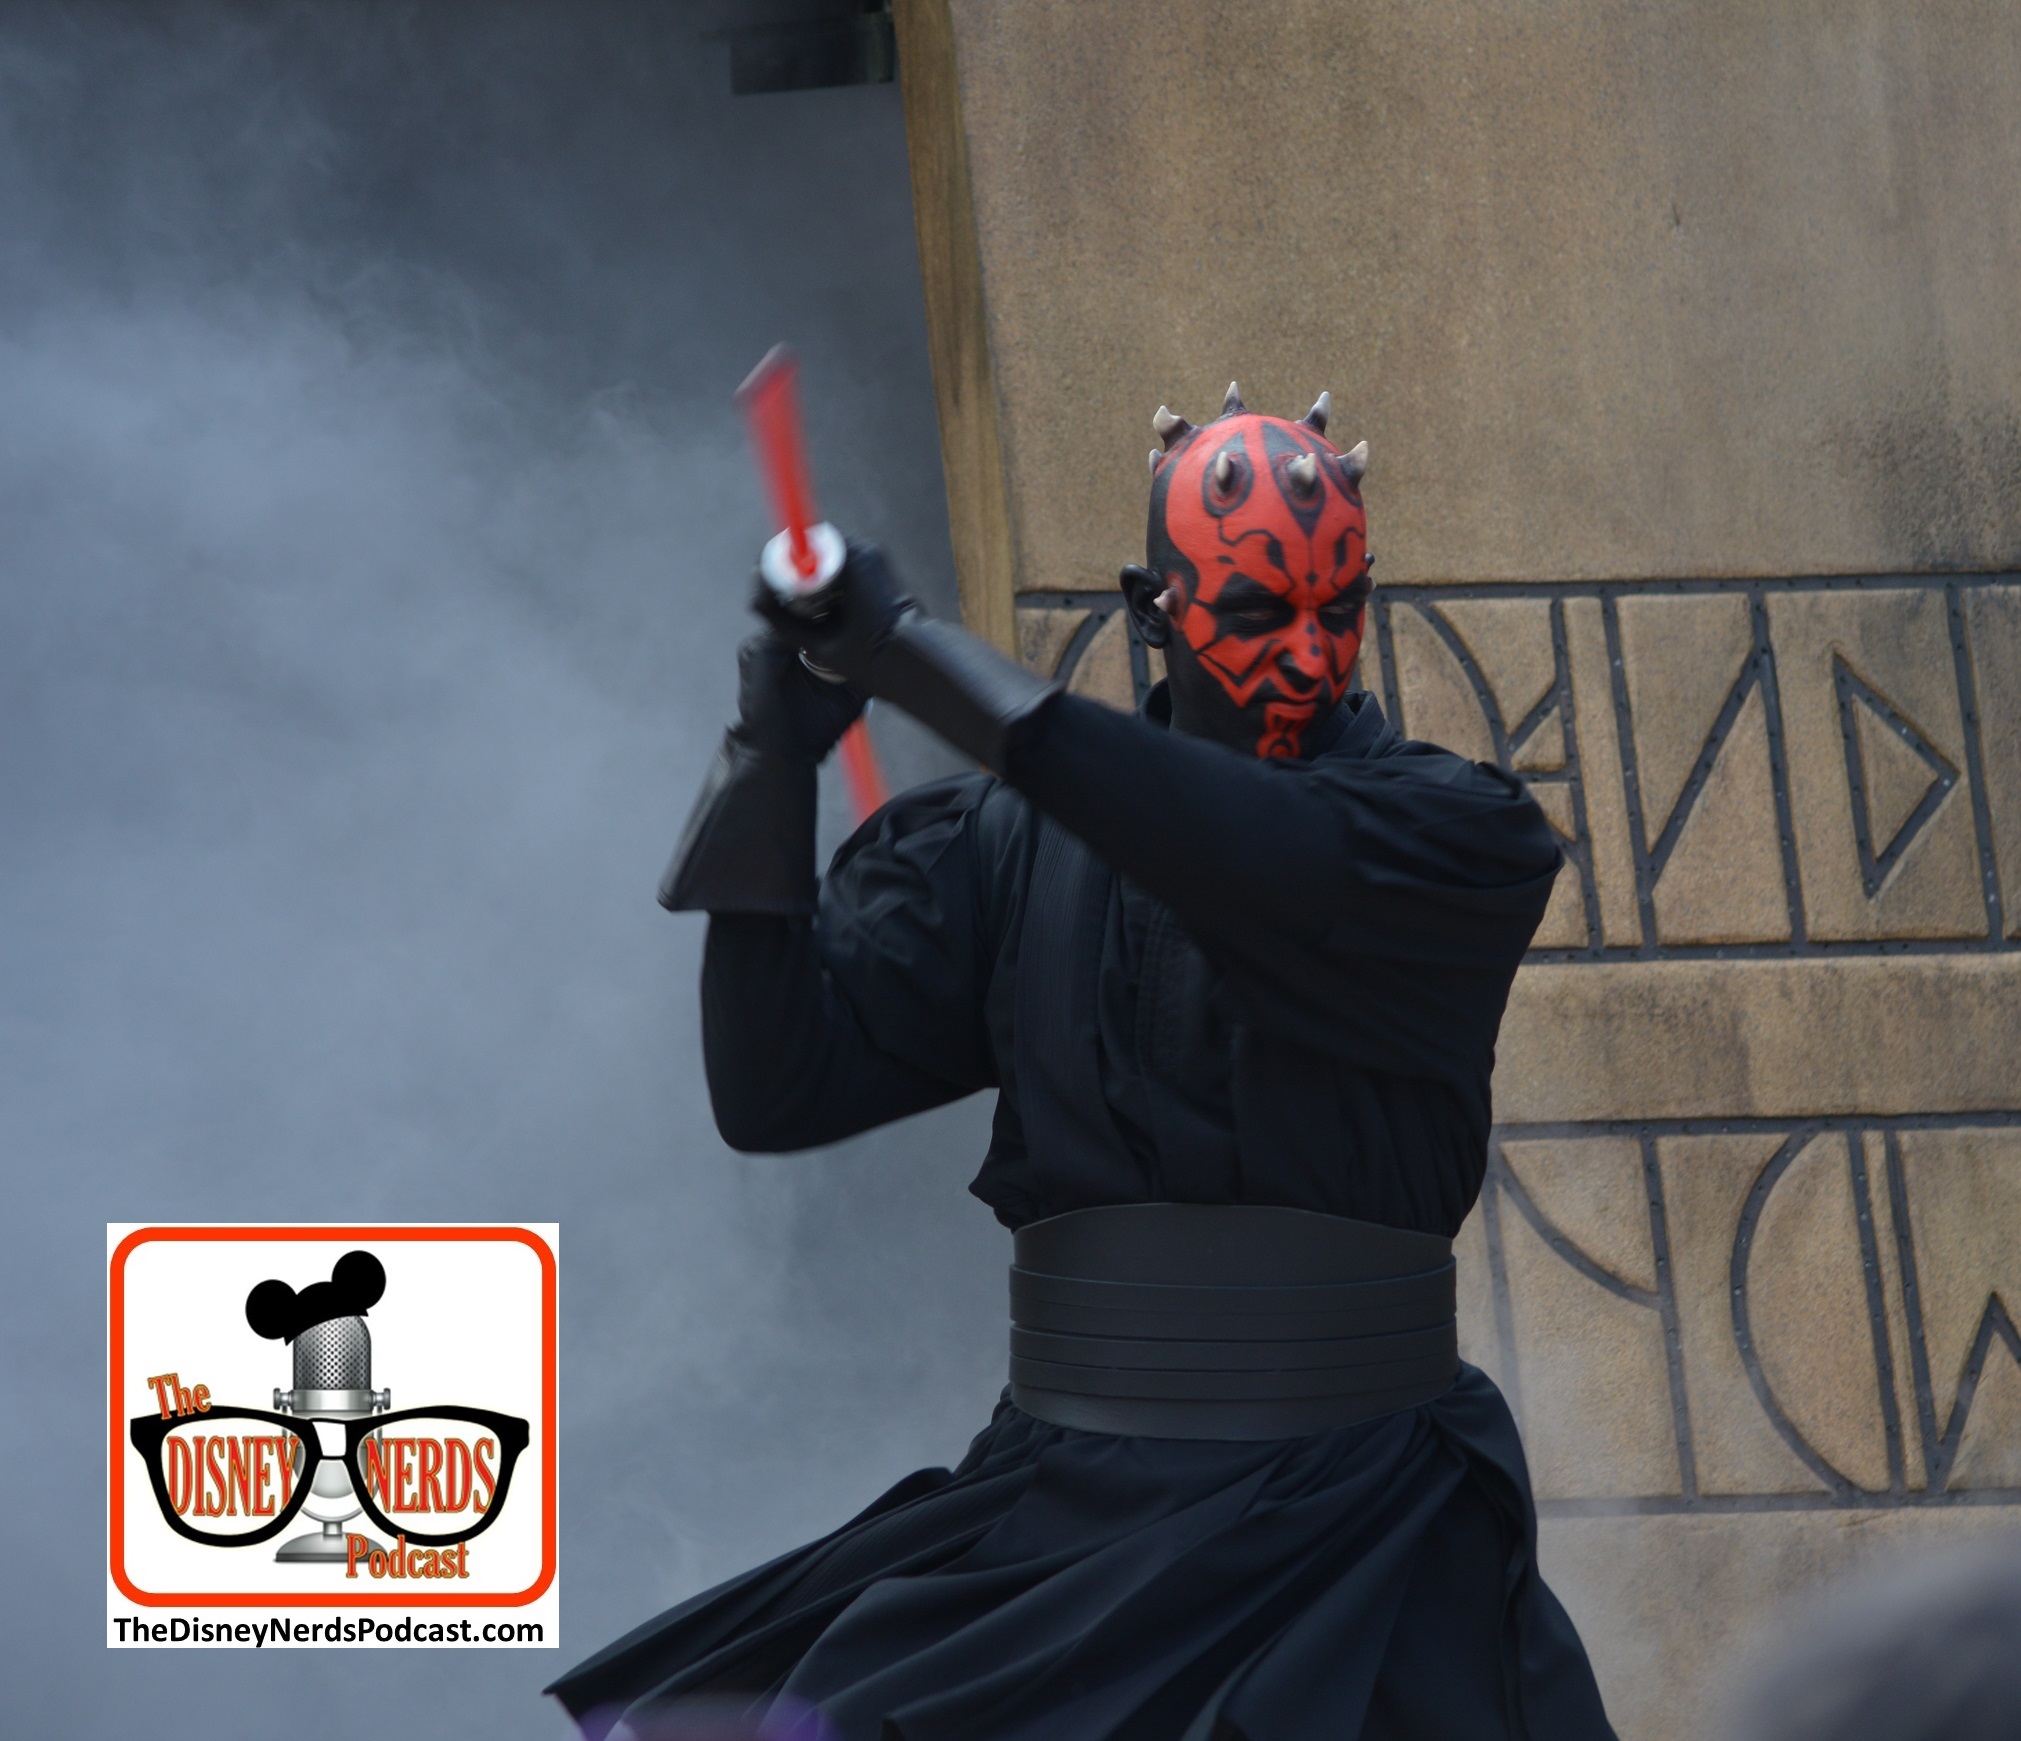 2015-12 - Hollywood Studios - New Jedi Training Stage and Show features an appearance by Darth Maul